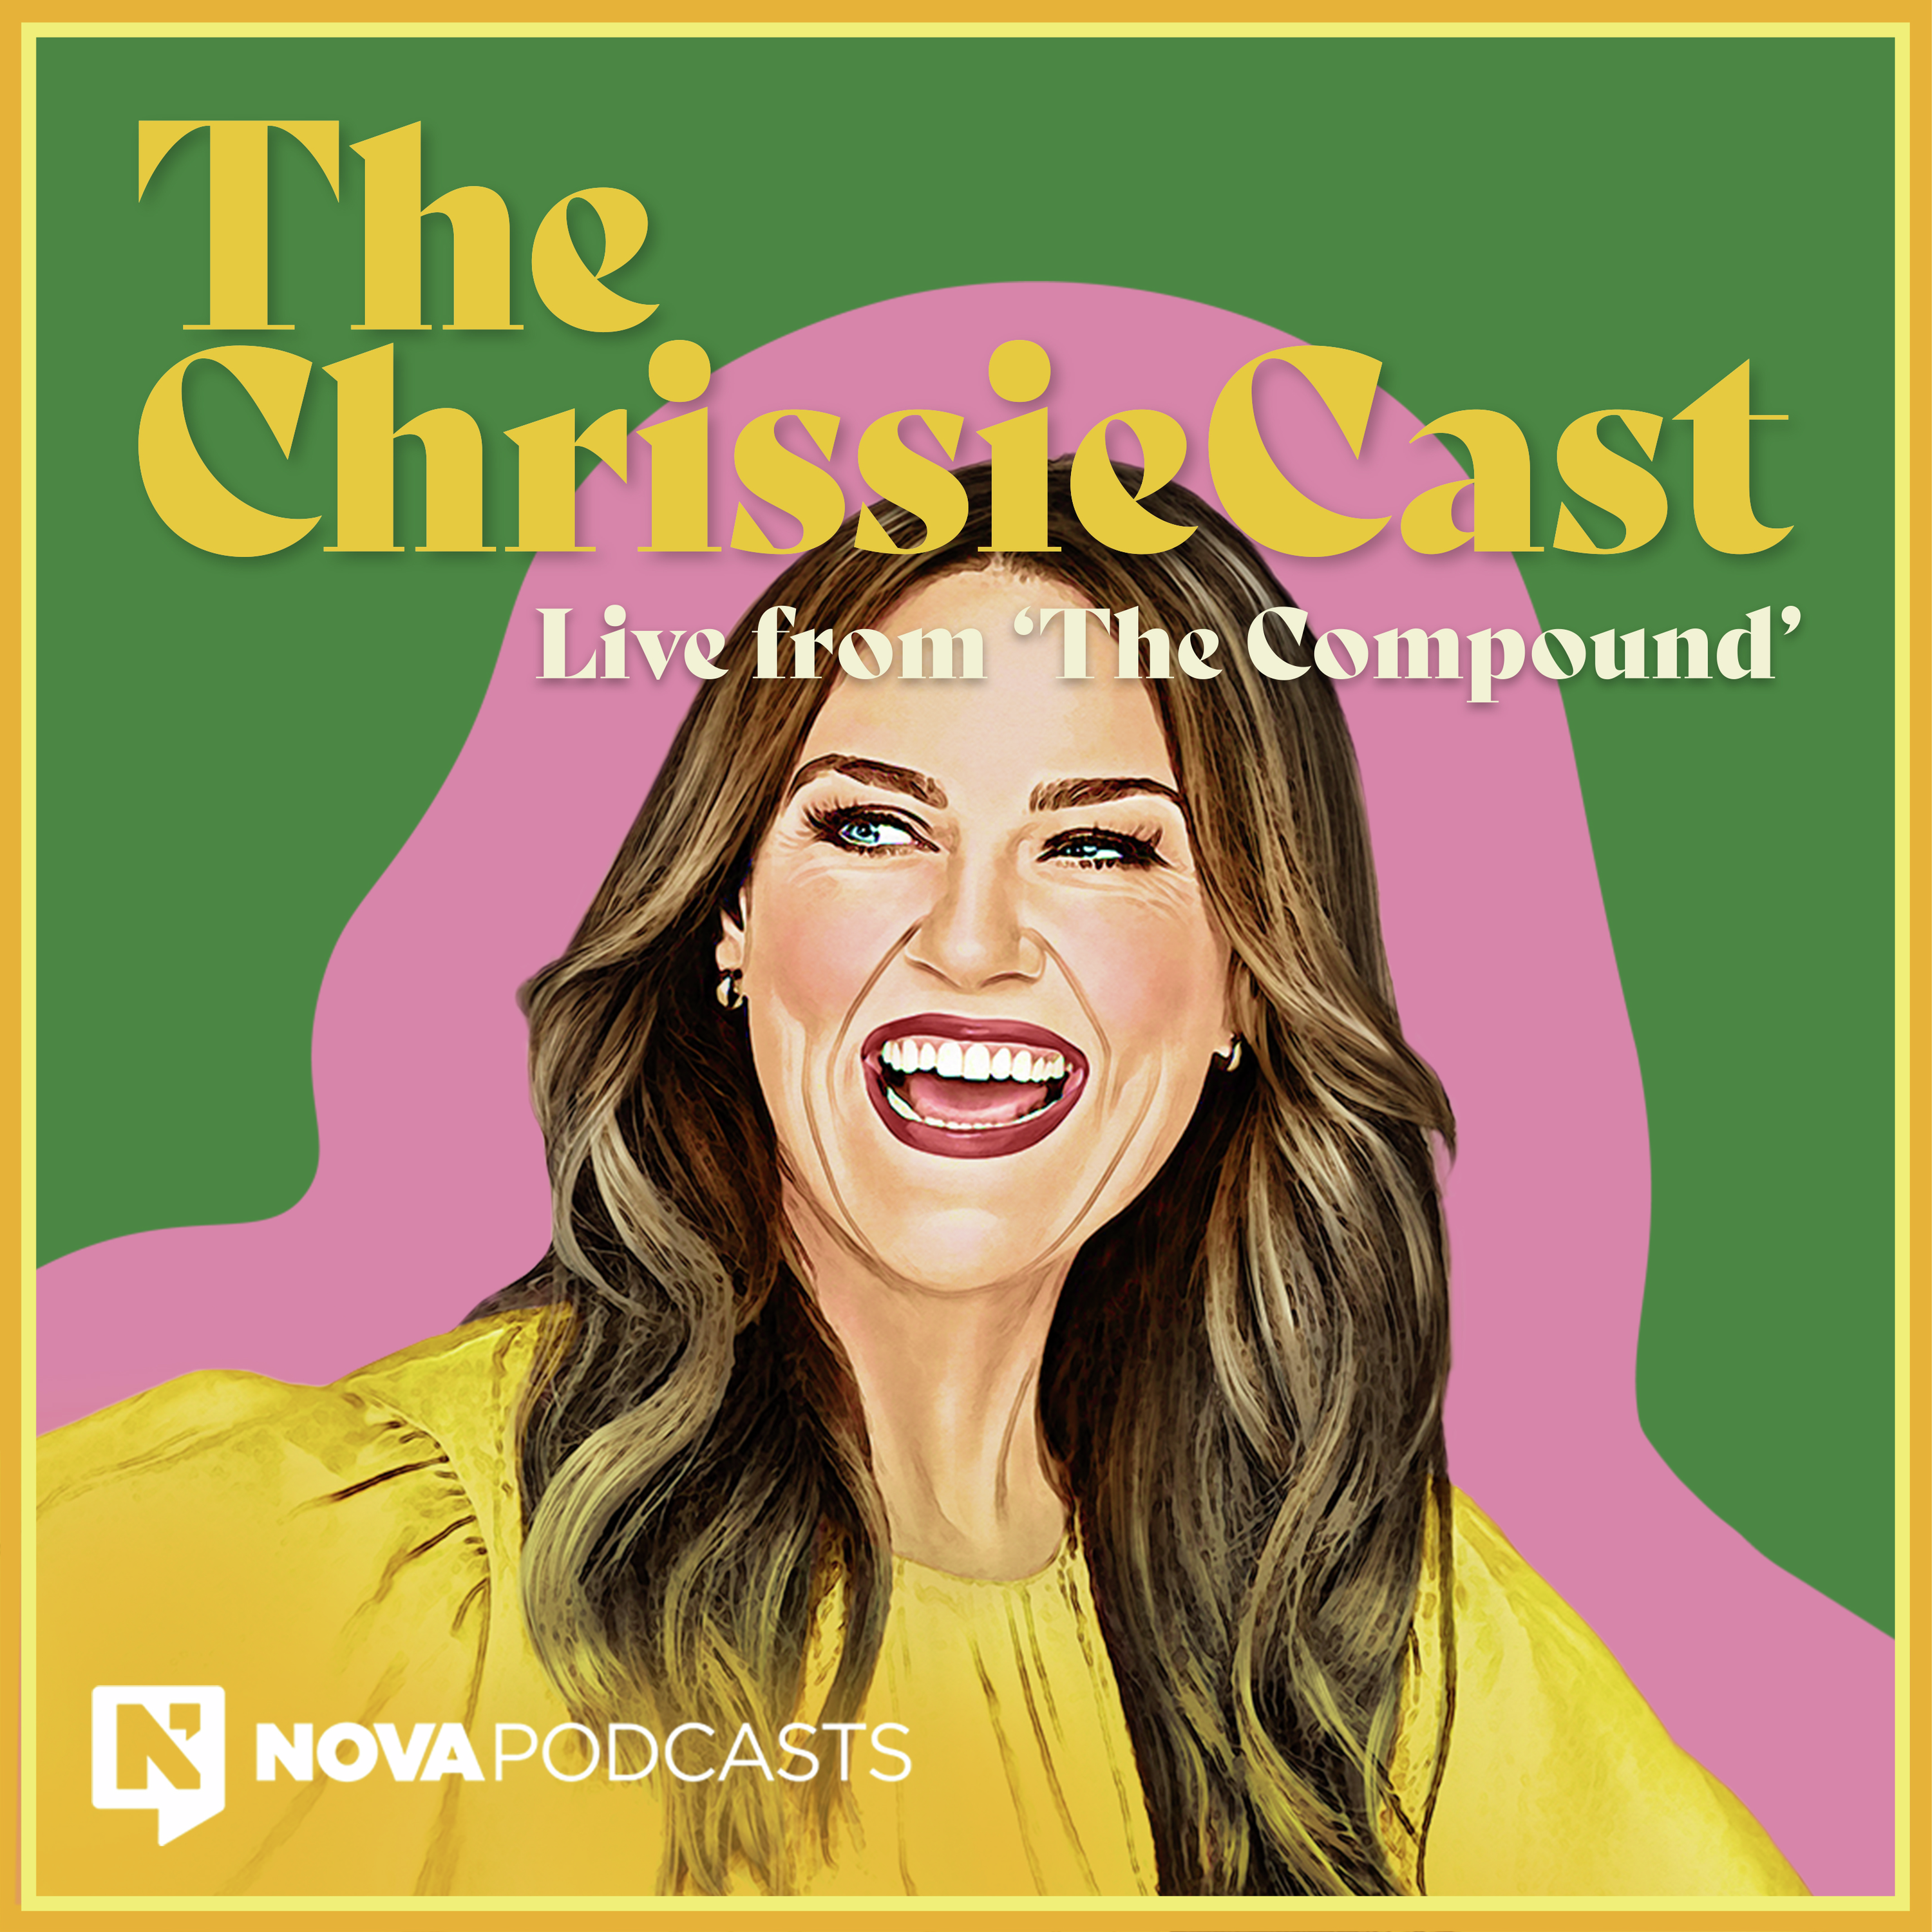 The ChrissieCast: Dave Thornton And Chrissie Talk Tahini, Paper Versus Plastic And Spelling Bees